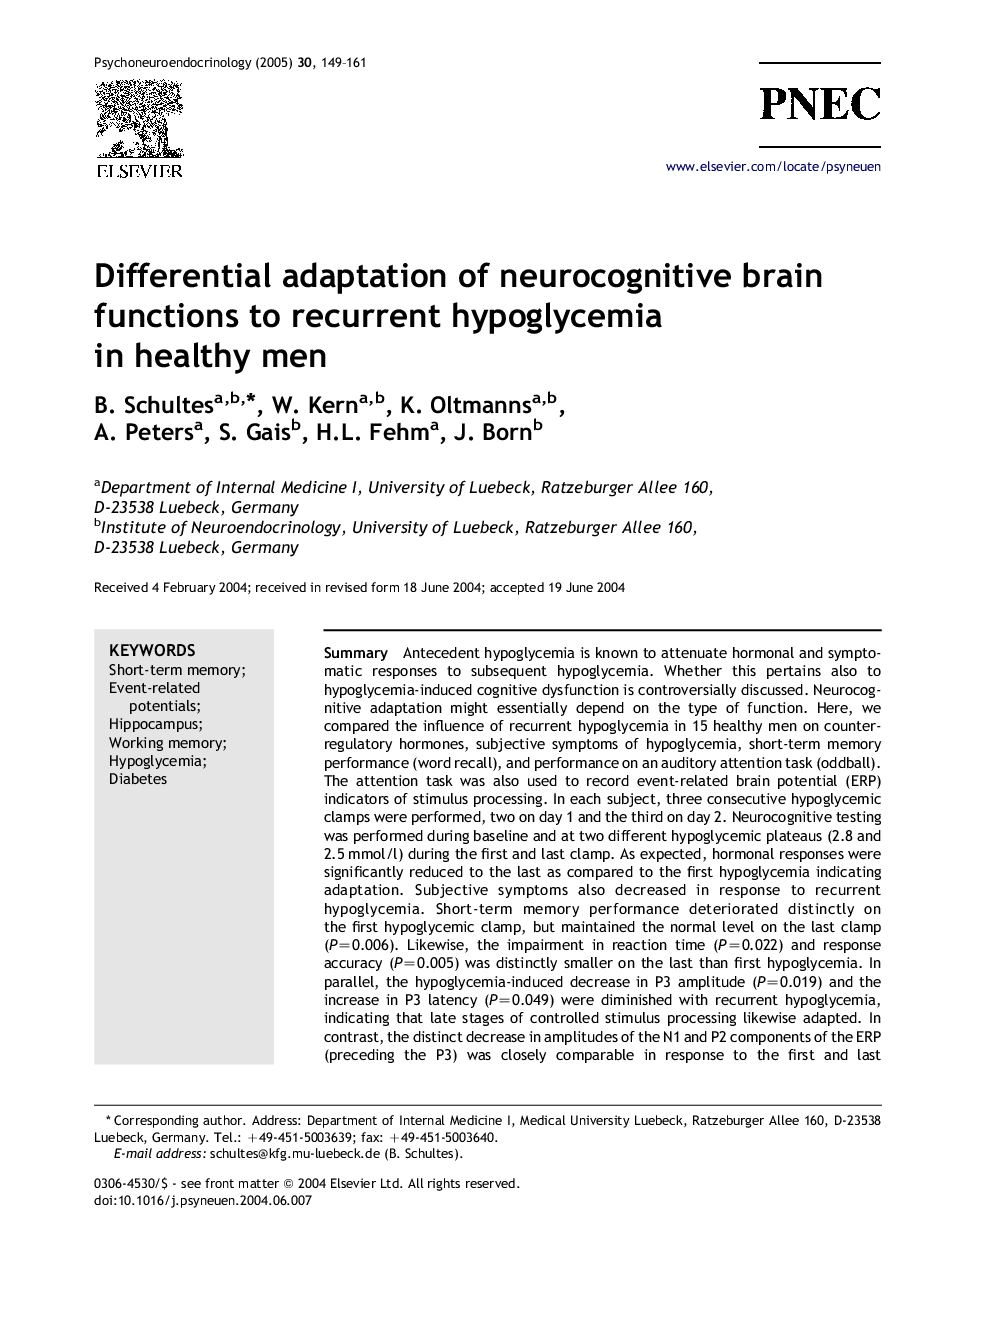 Differential adaptation of neurocognitive brain functions to recurrent hypoglycemia in healthy men